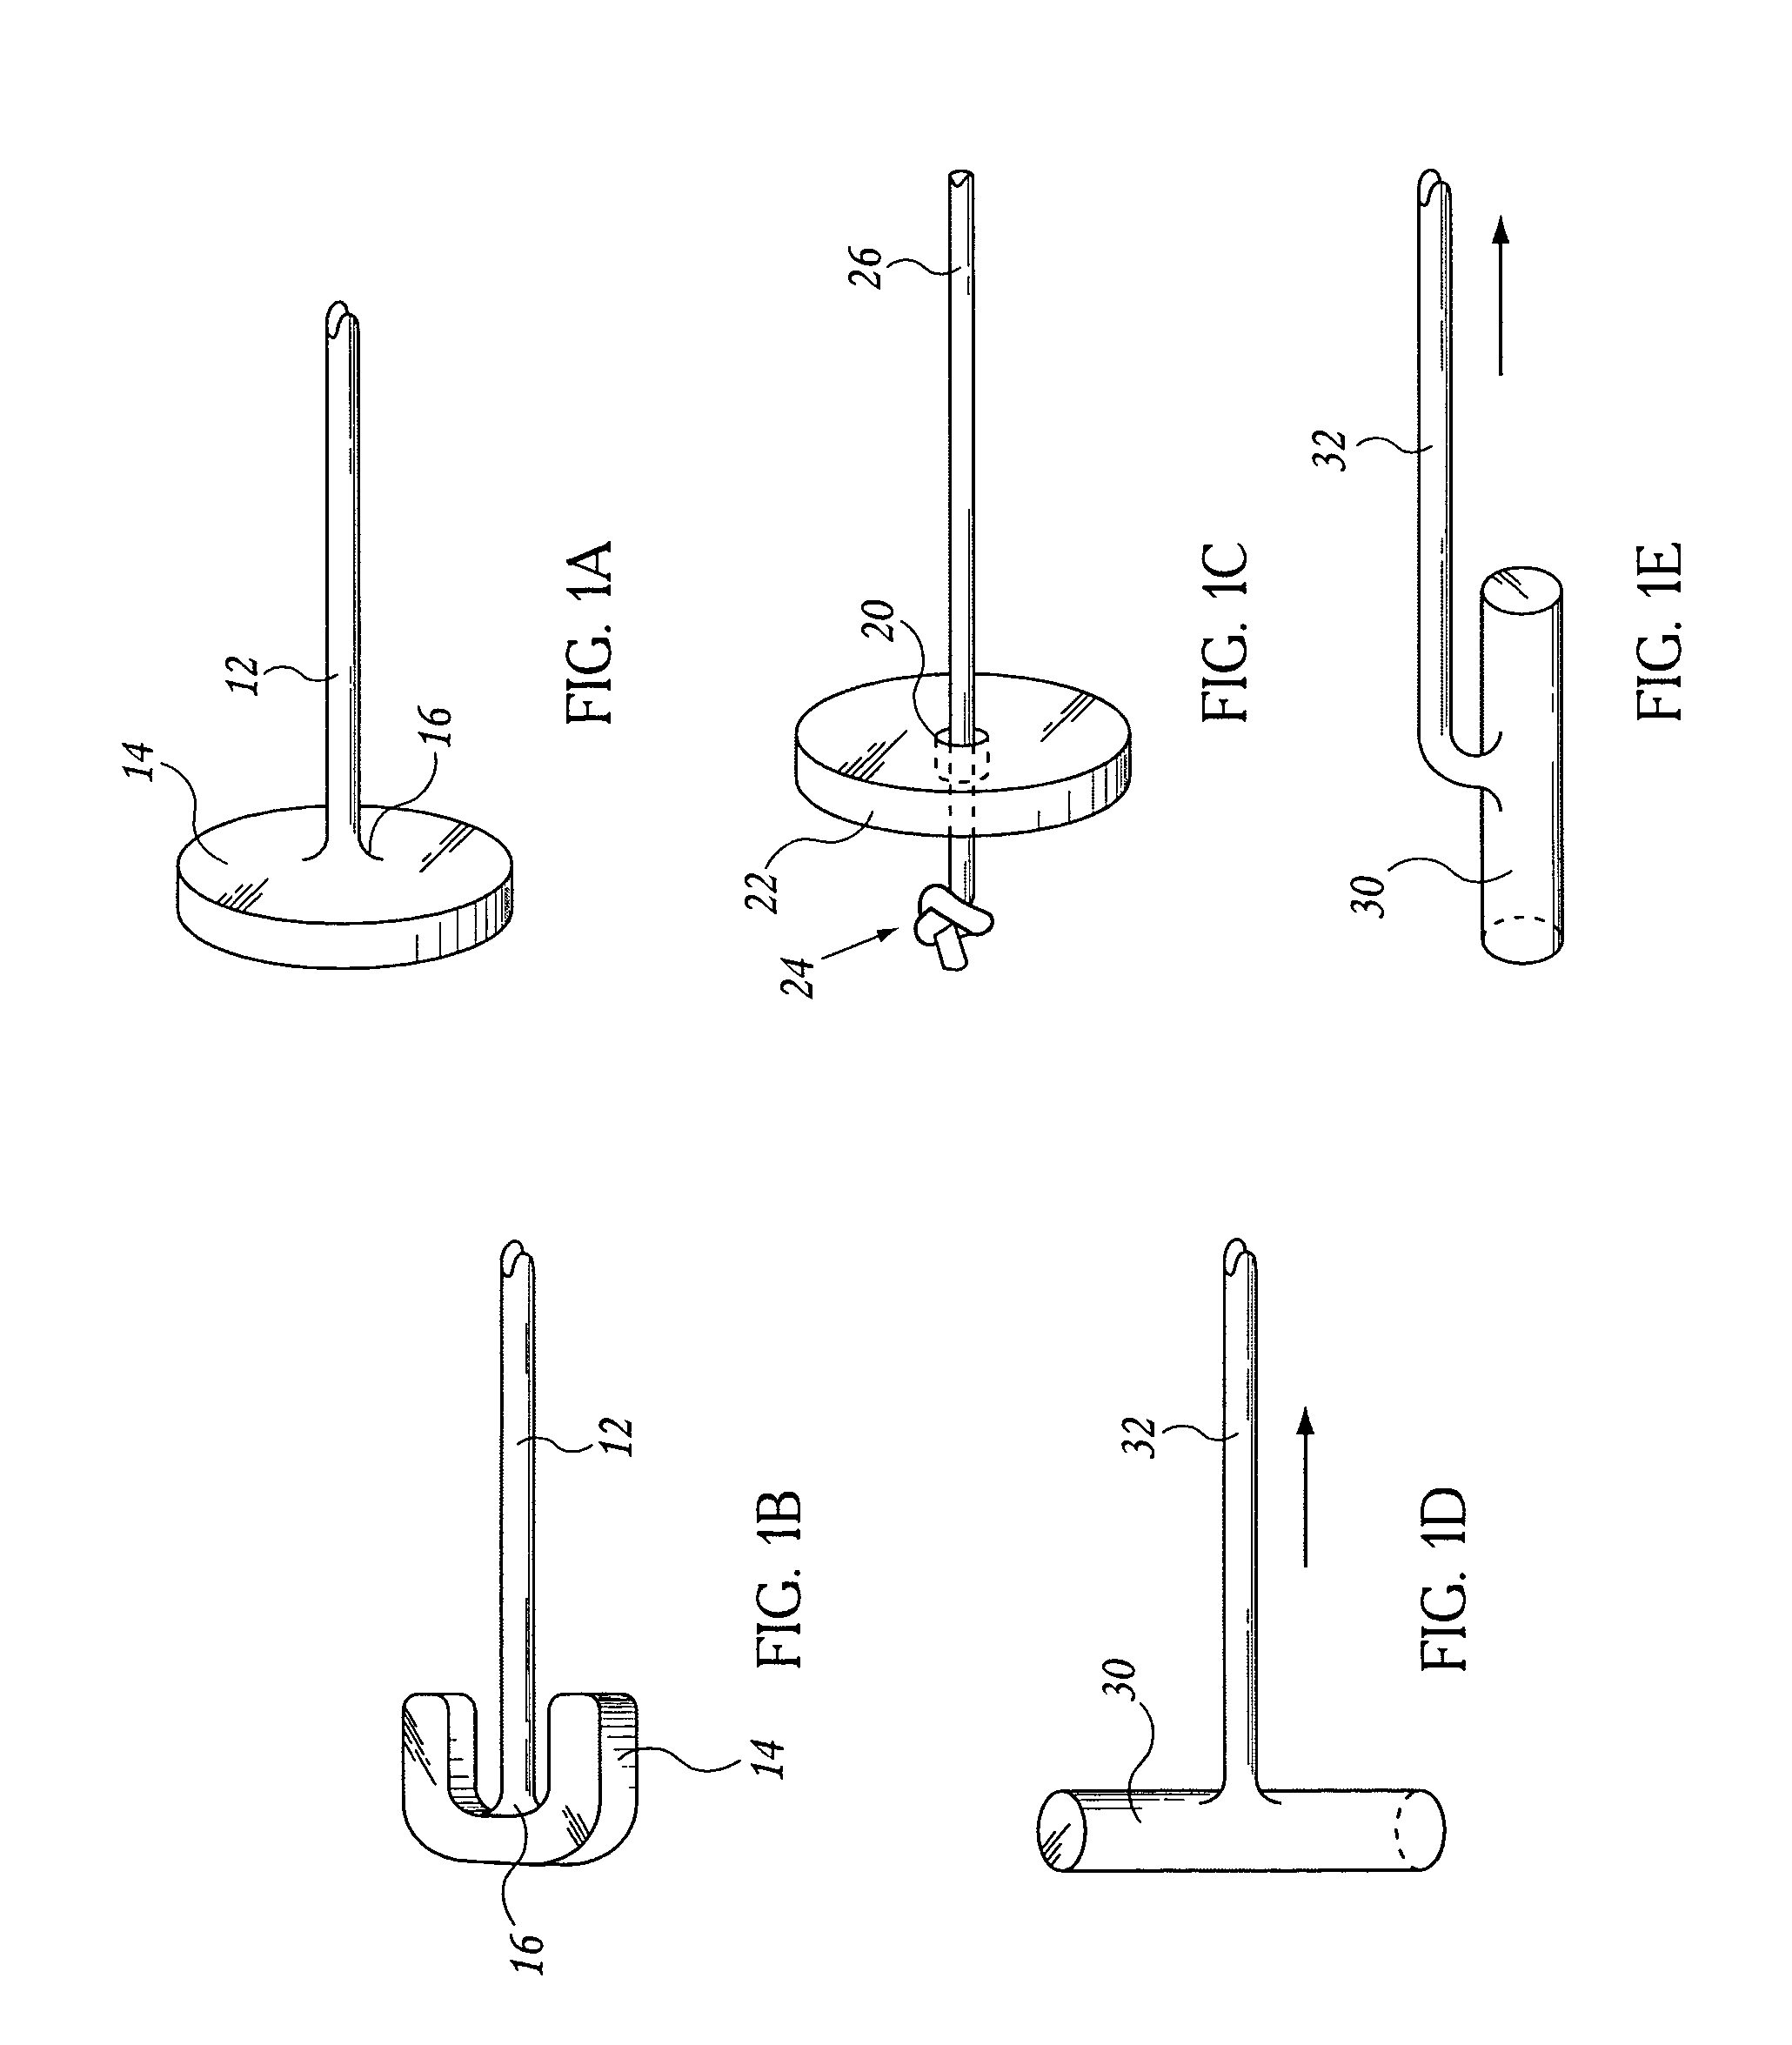 Methods and devices for the surgical creation of satiety and biofeedback pathways